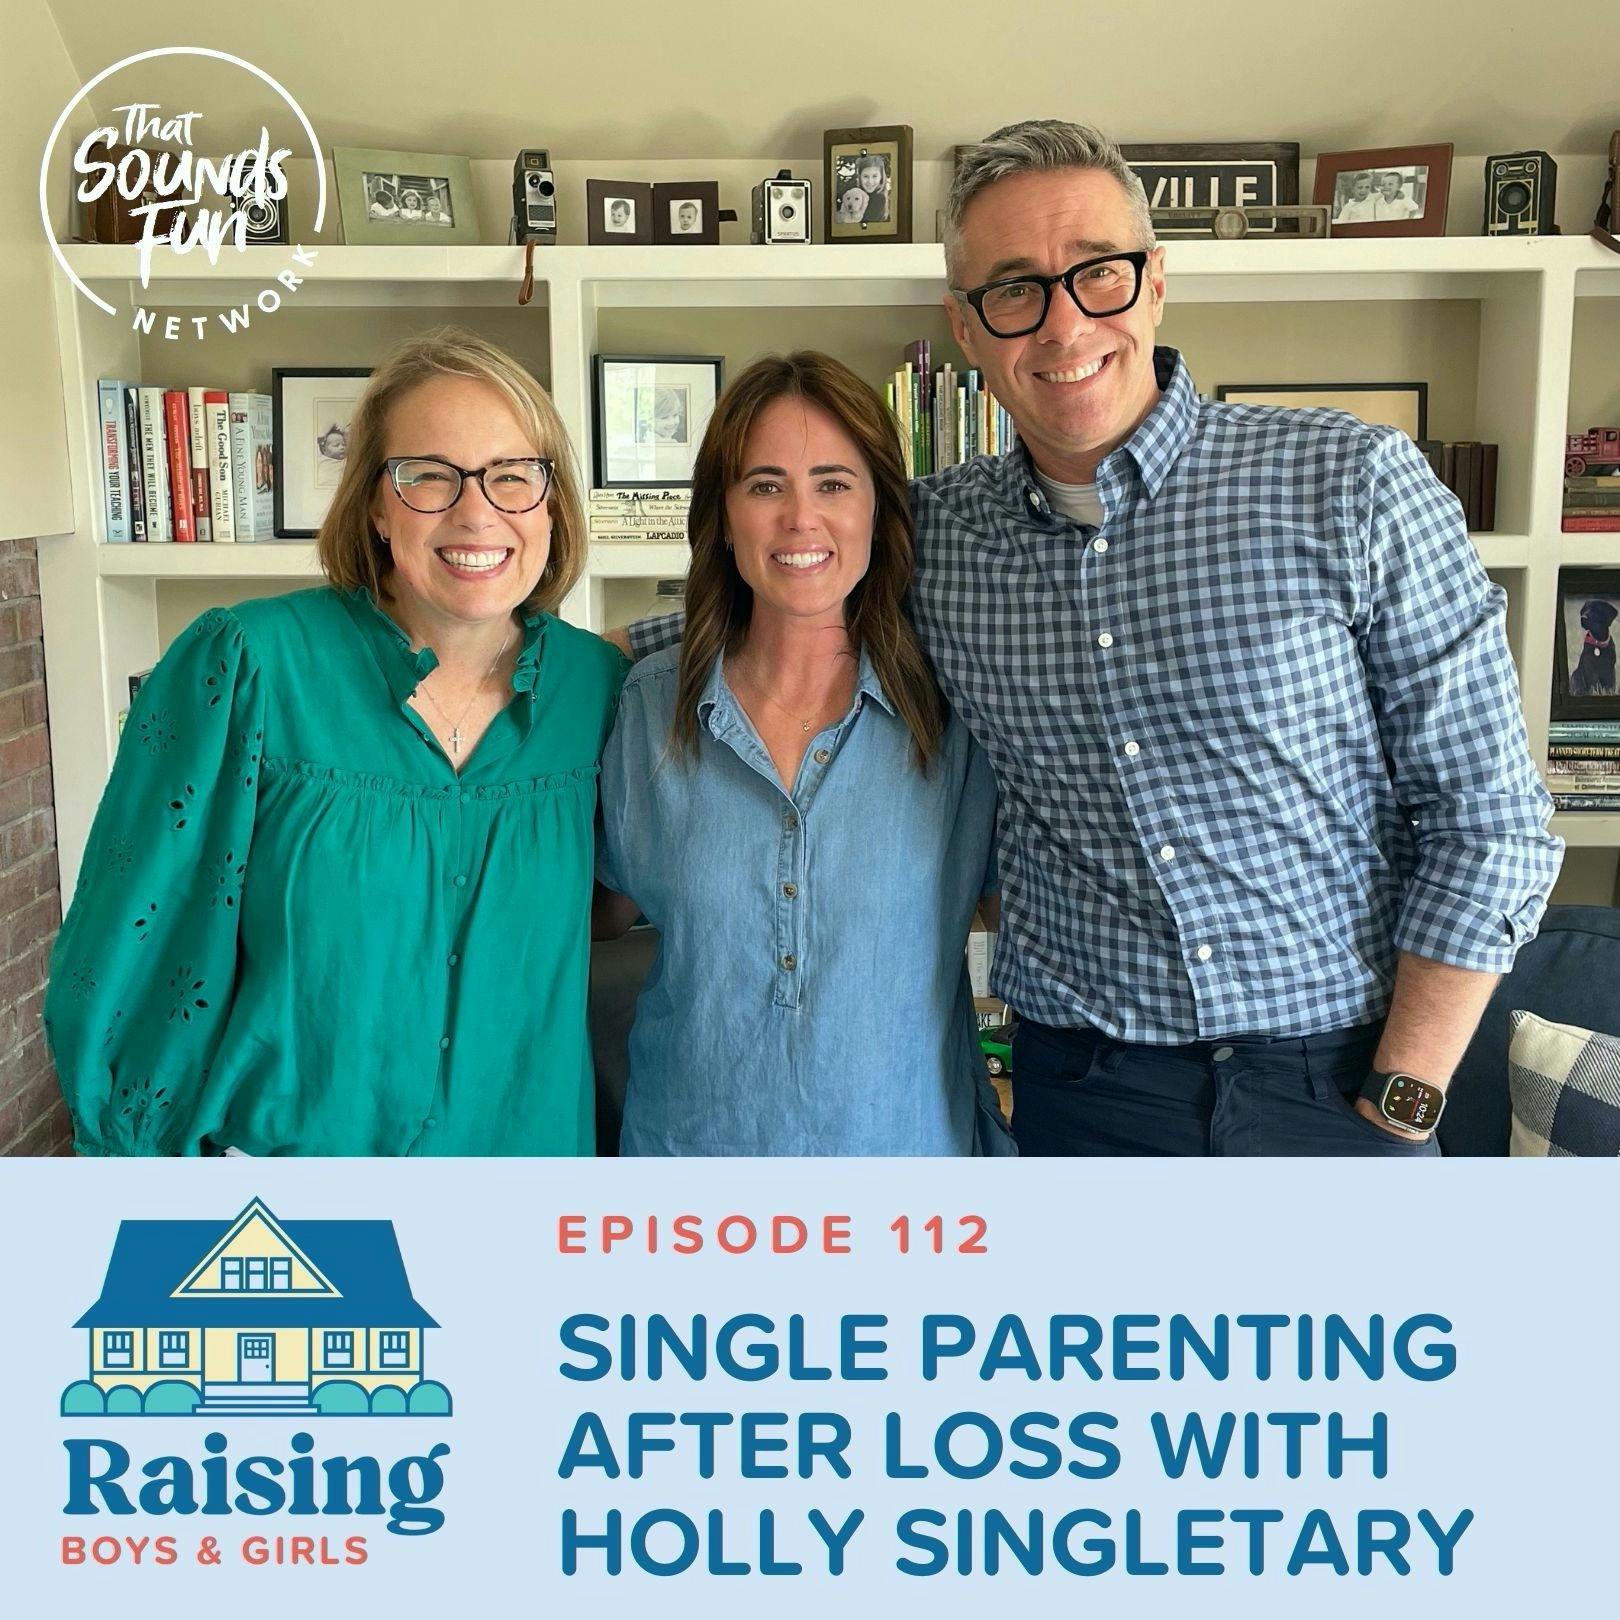 Episode 112: Single Parenting After Loss